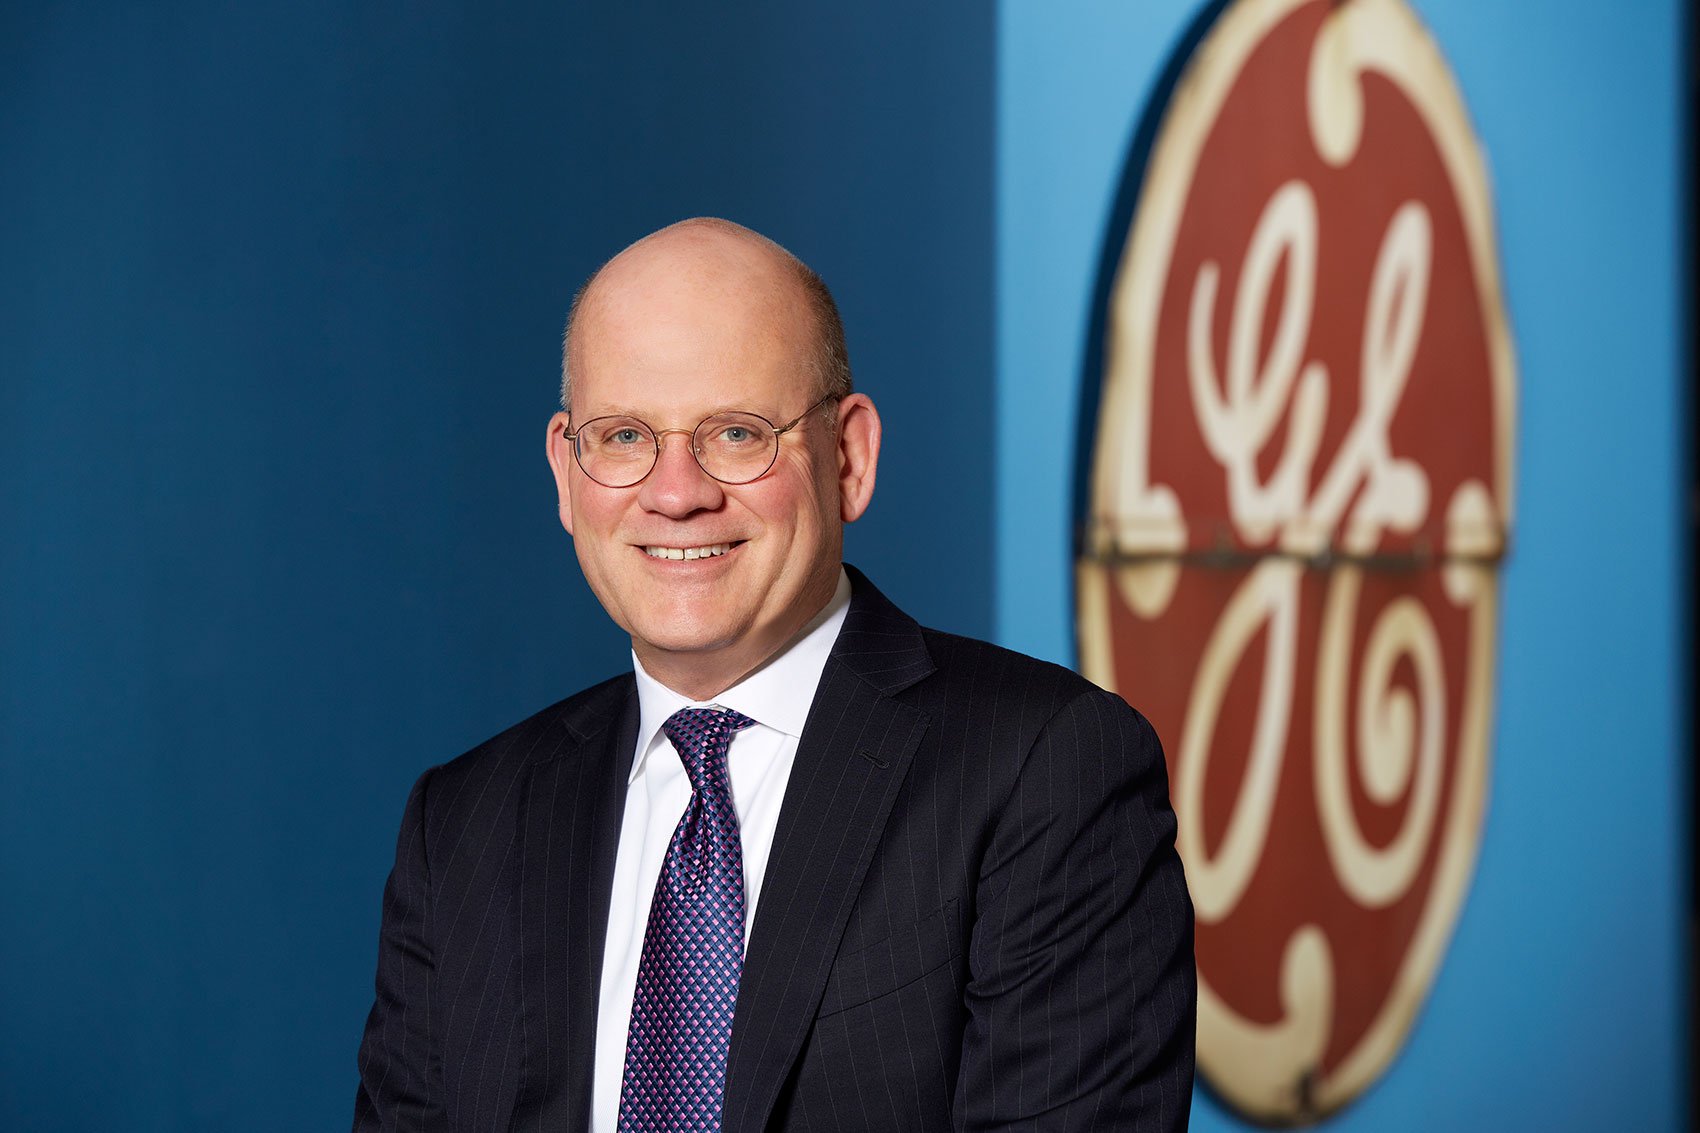 GE CEO Immelt Stepping Down, Flannery To Take Over Role ...